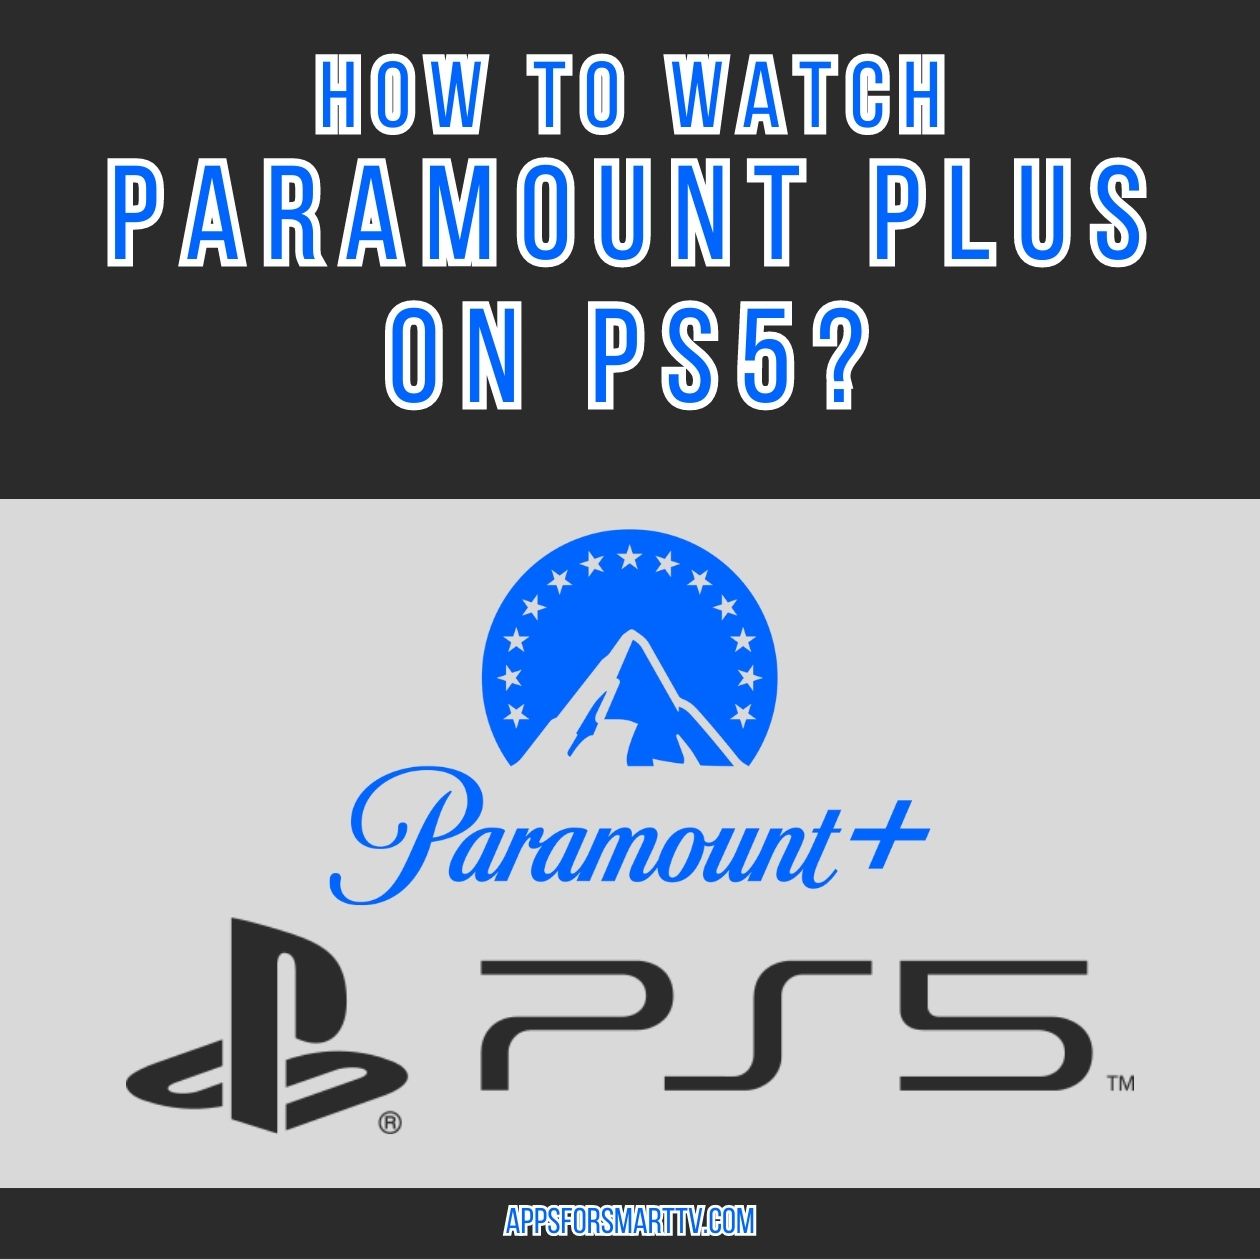 How to Watch Paramount Plus on PS5